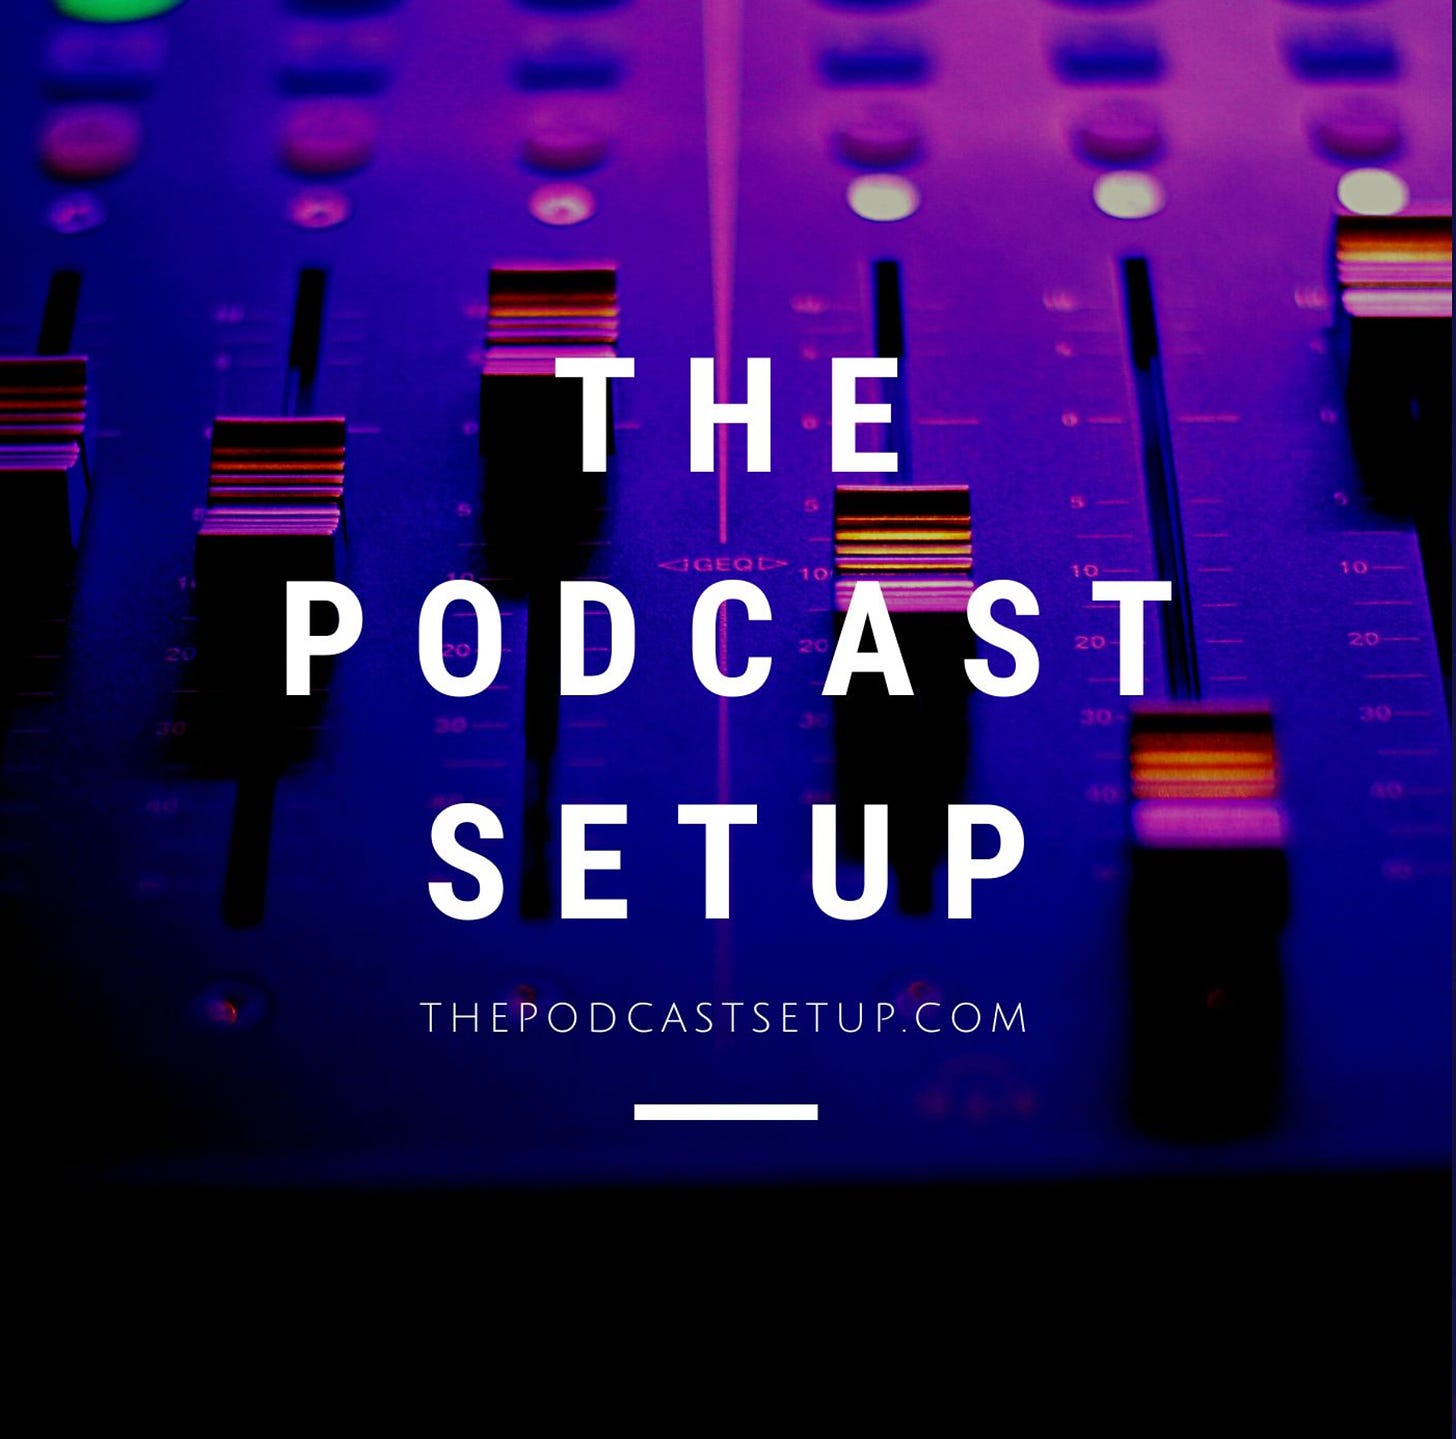 Part of a mixing board in the background, with The Podcast Setup title centered over top.